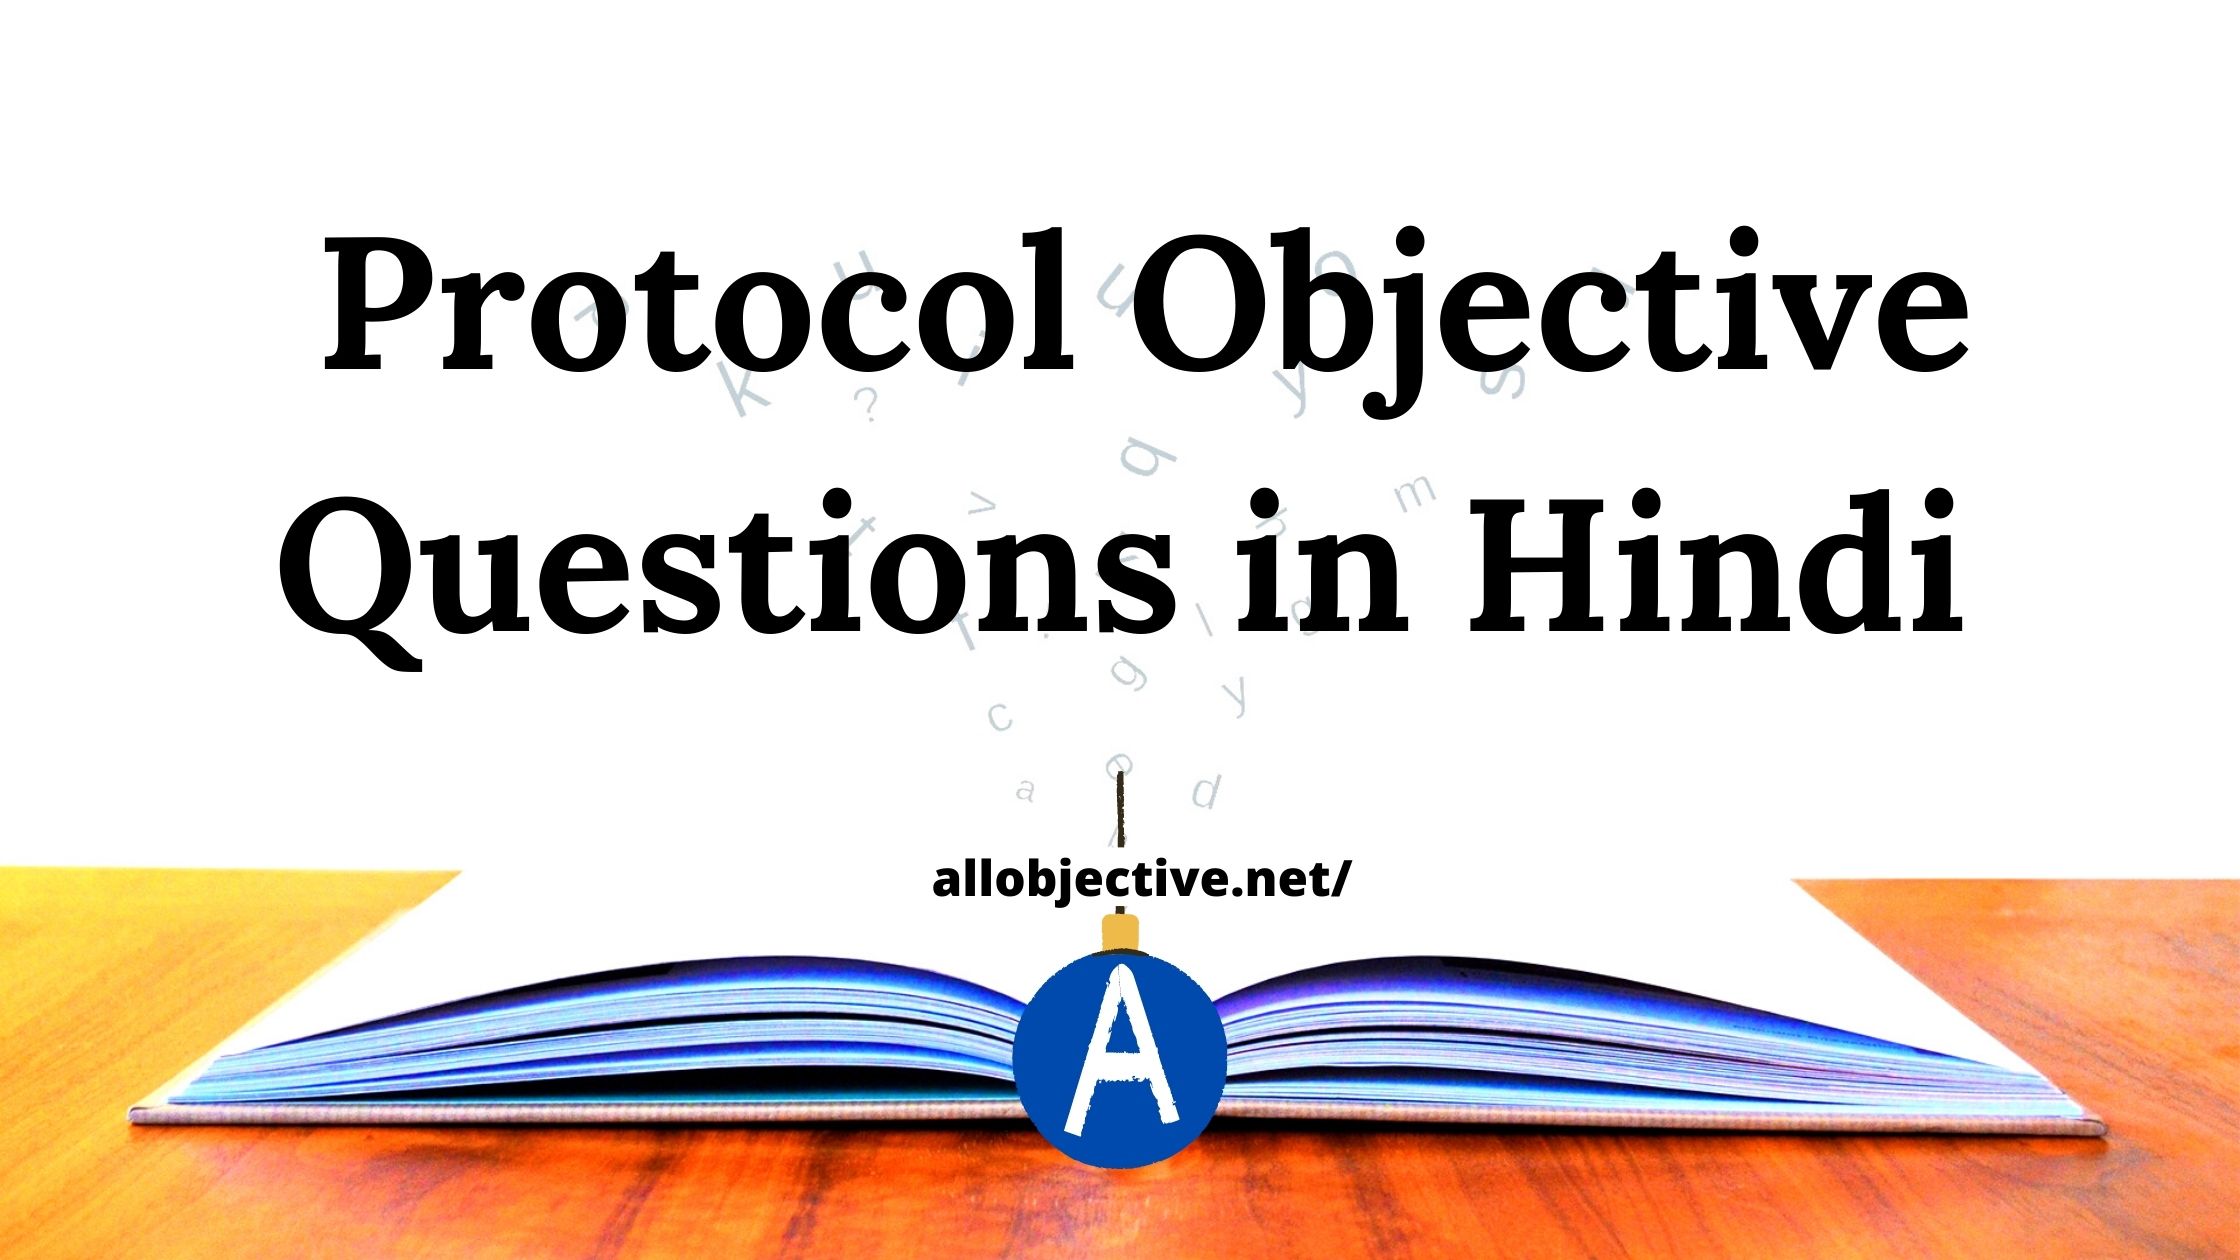 Protocol Objective Questions in Hindi